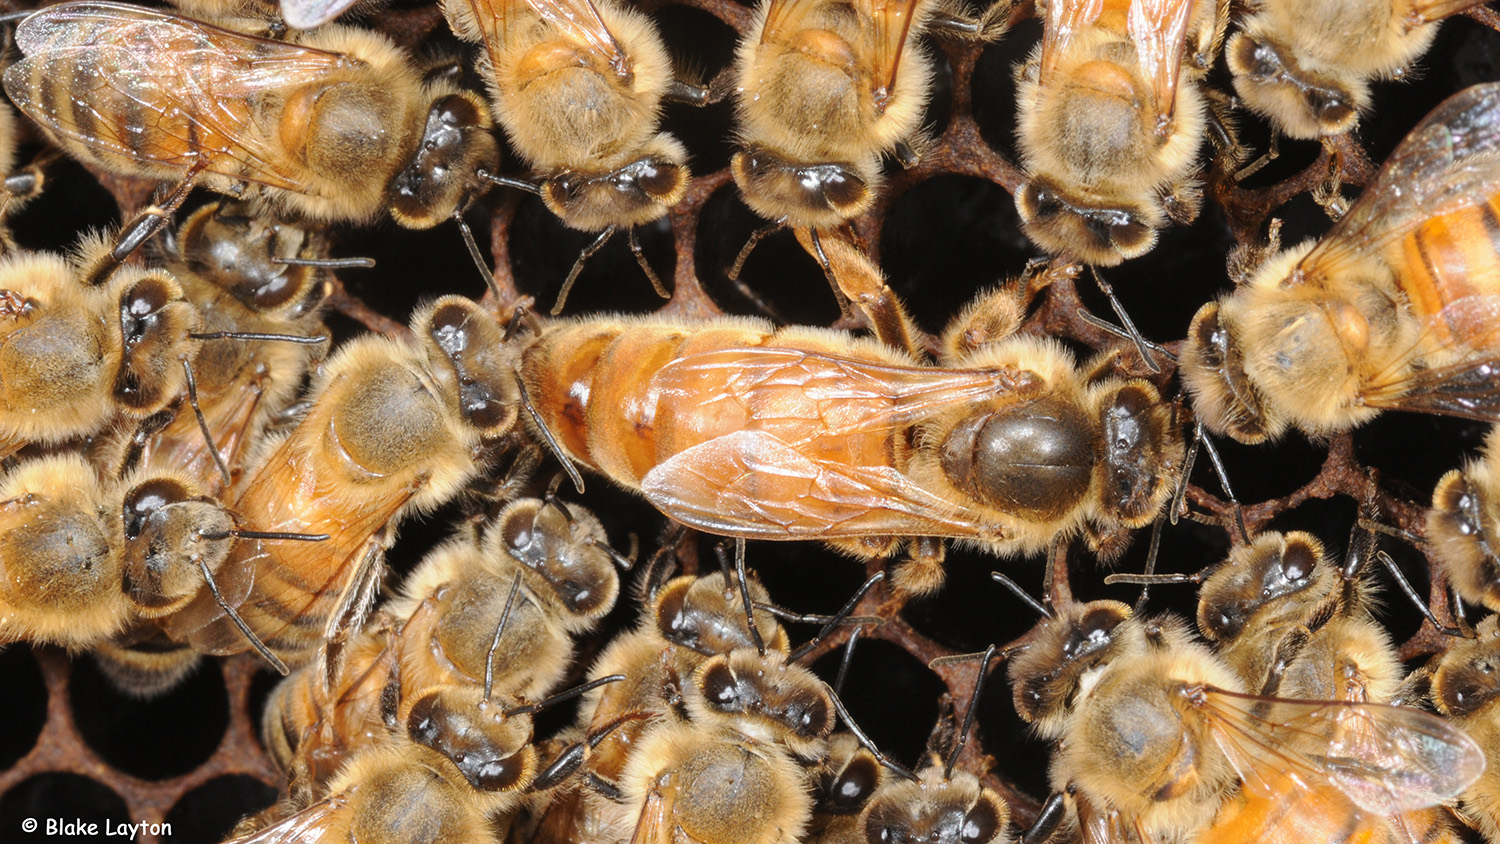 The Queen honey bee surrounded by worker bees.